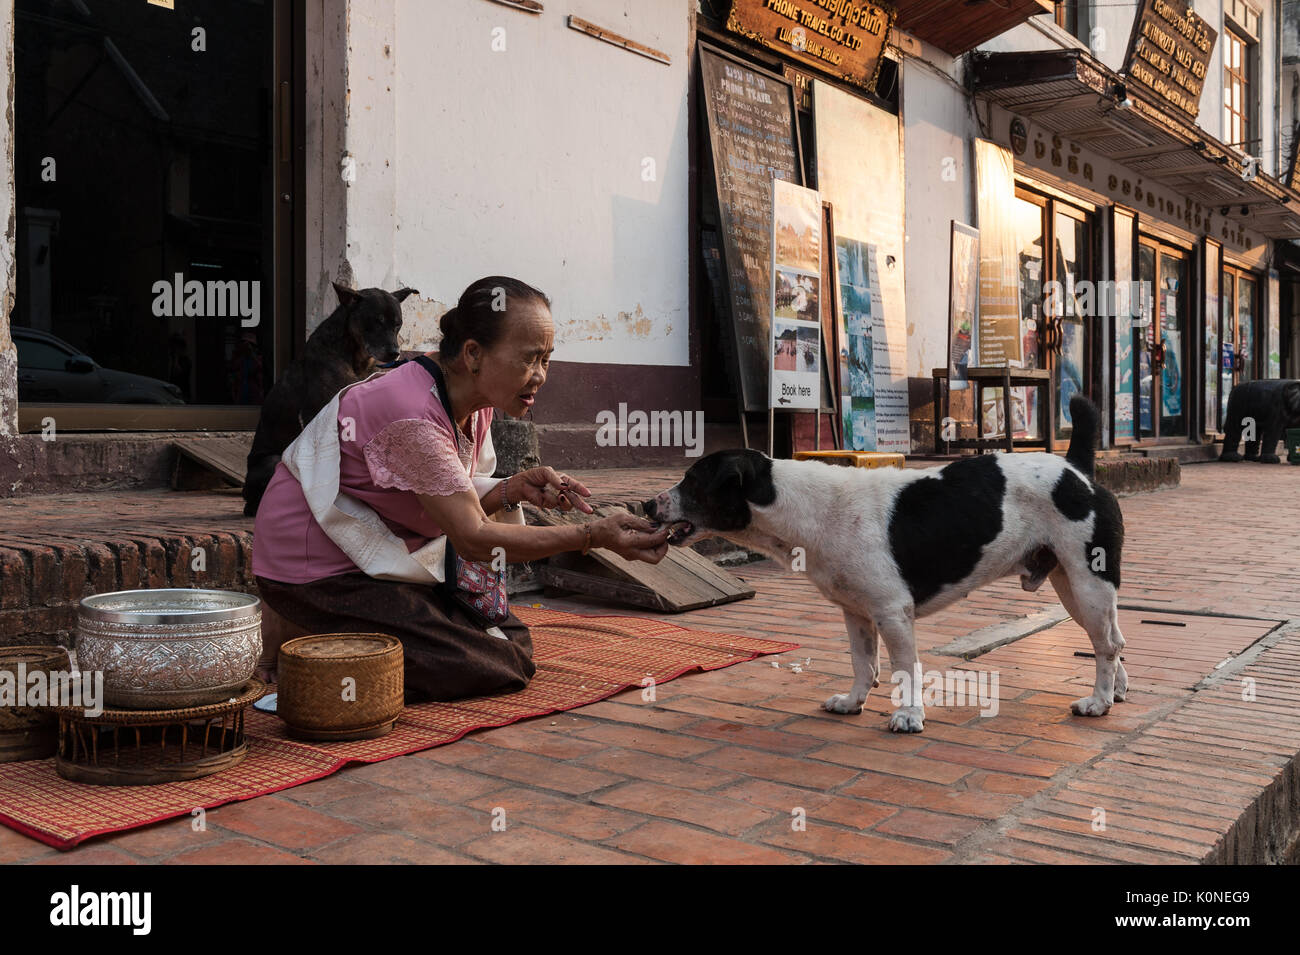 A woman feeds a stray dog with rice left over from the alms giving ceremony in Luang Prabang, Laos, as providing offerings is a part of karmic beliefs Stock Photo